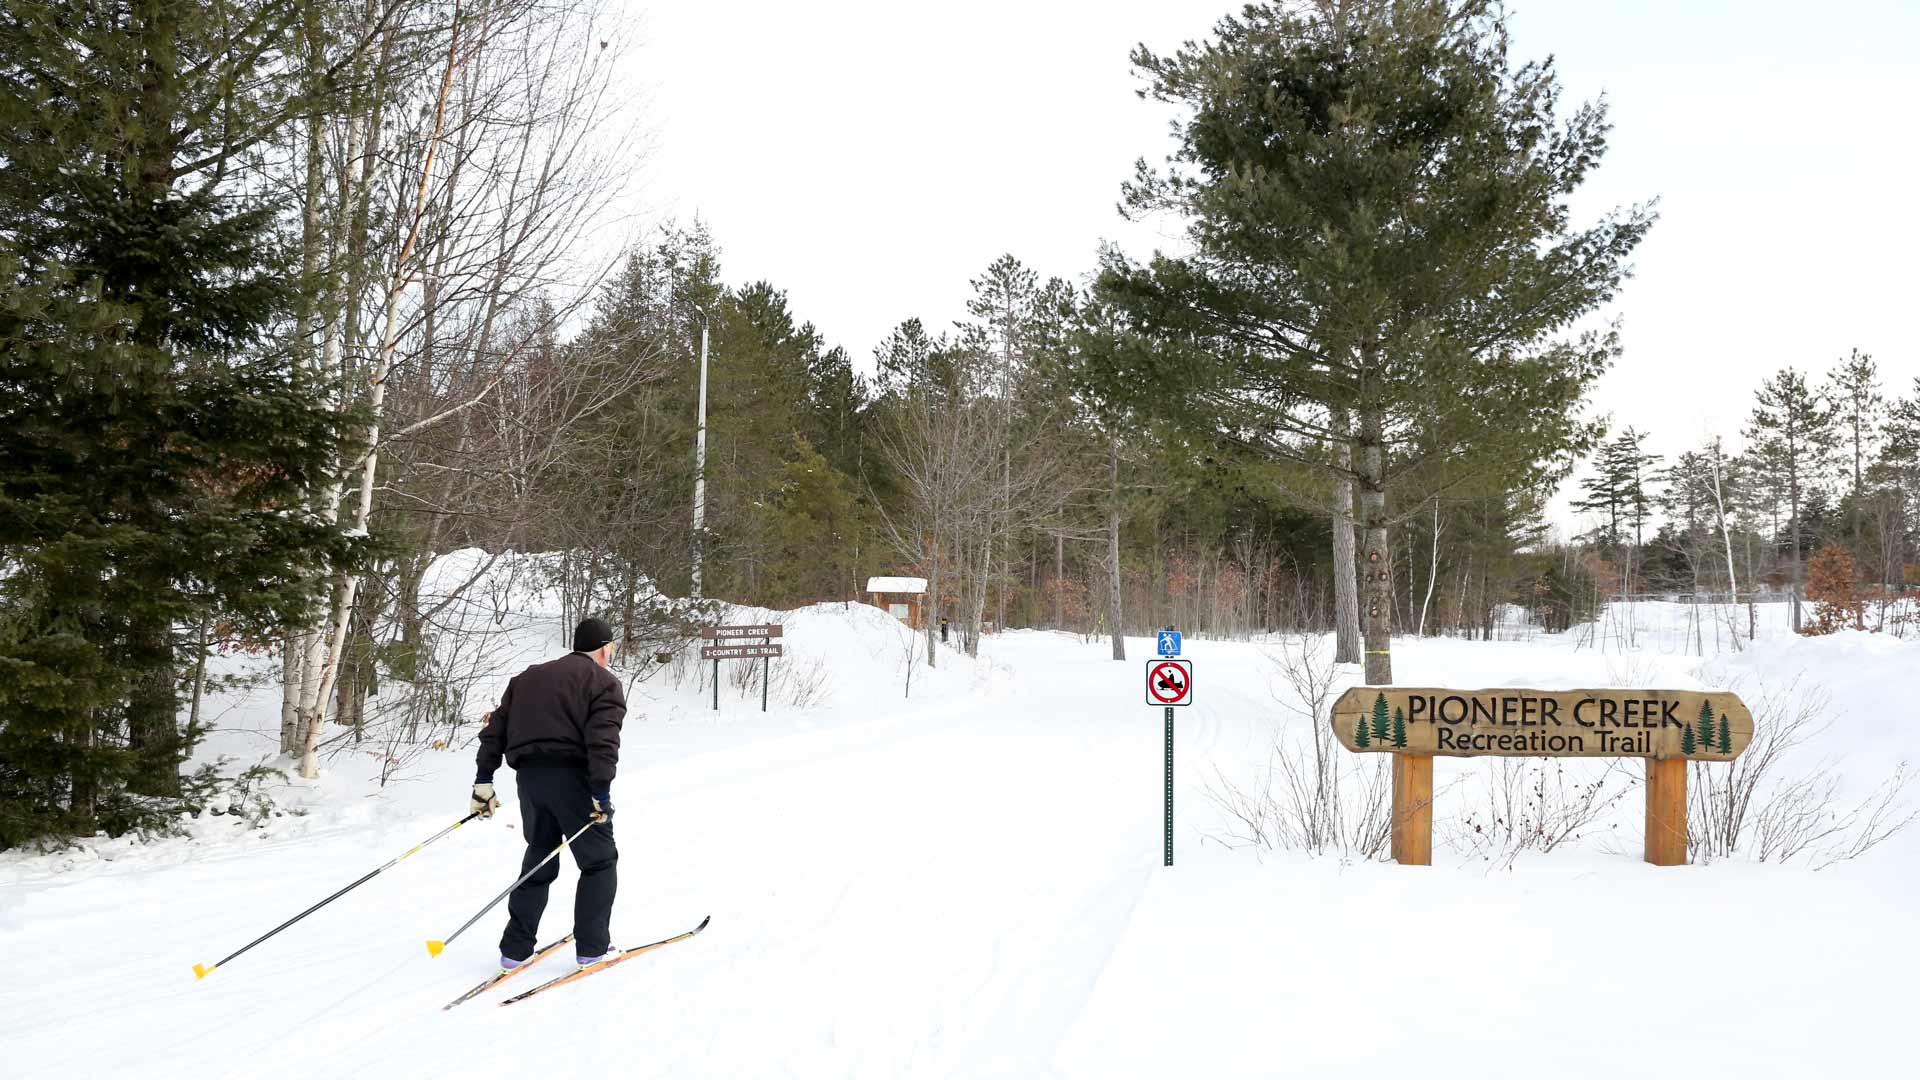 Person cross country skiing on Pioneer Creek Cross-Country Ski Trail of Vilas County, Wisconsin